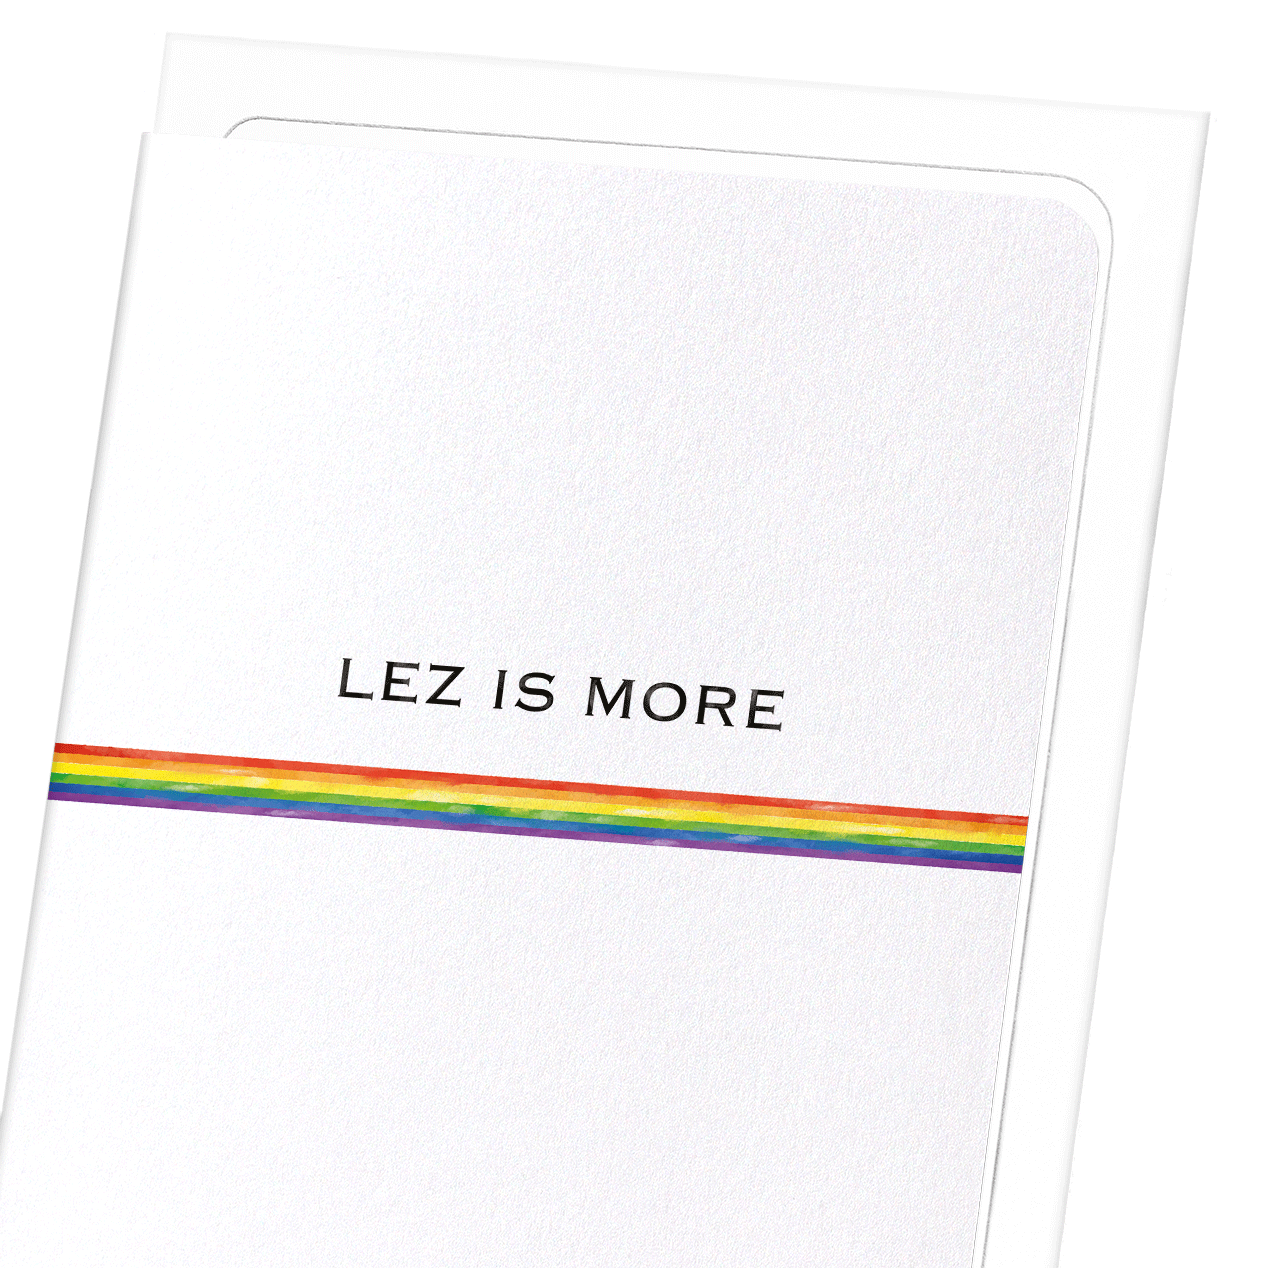 LEZ IS MORE: Watercolour Greeting Card